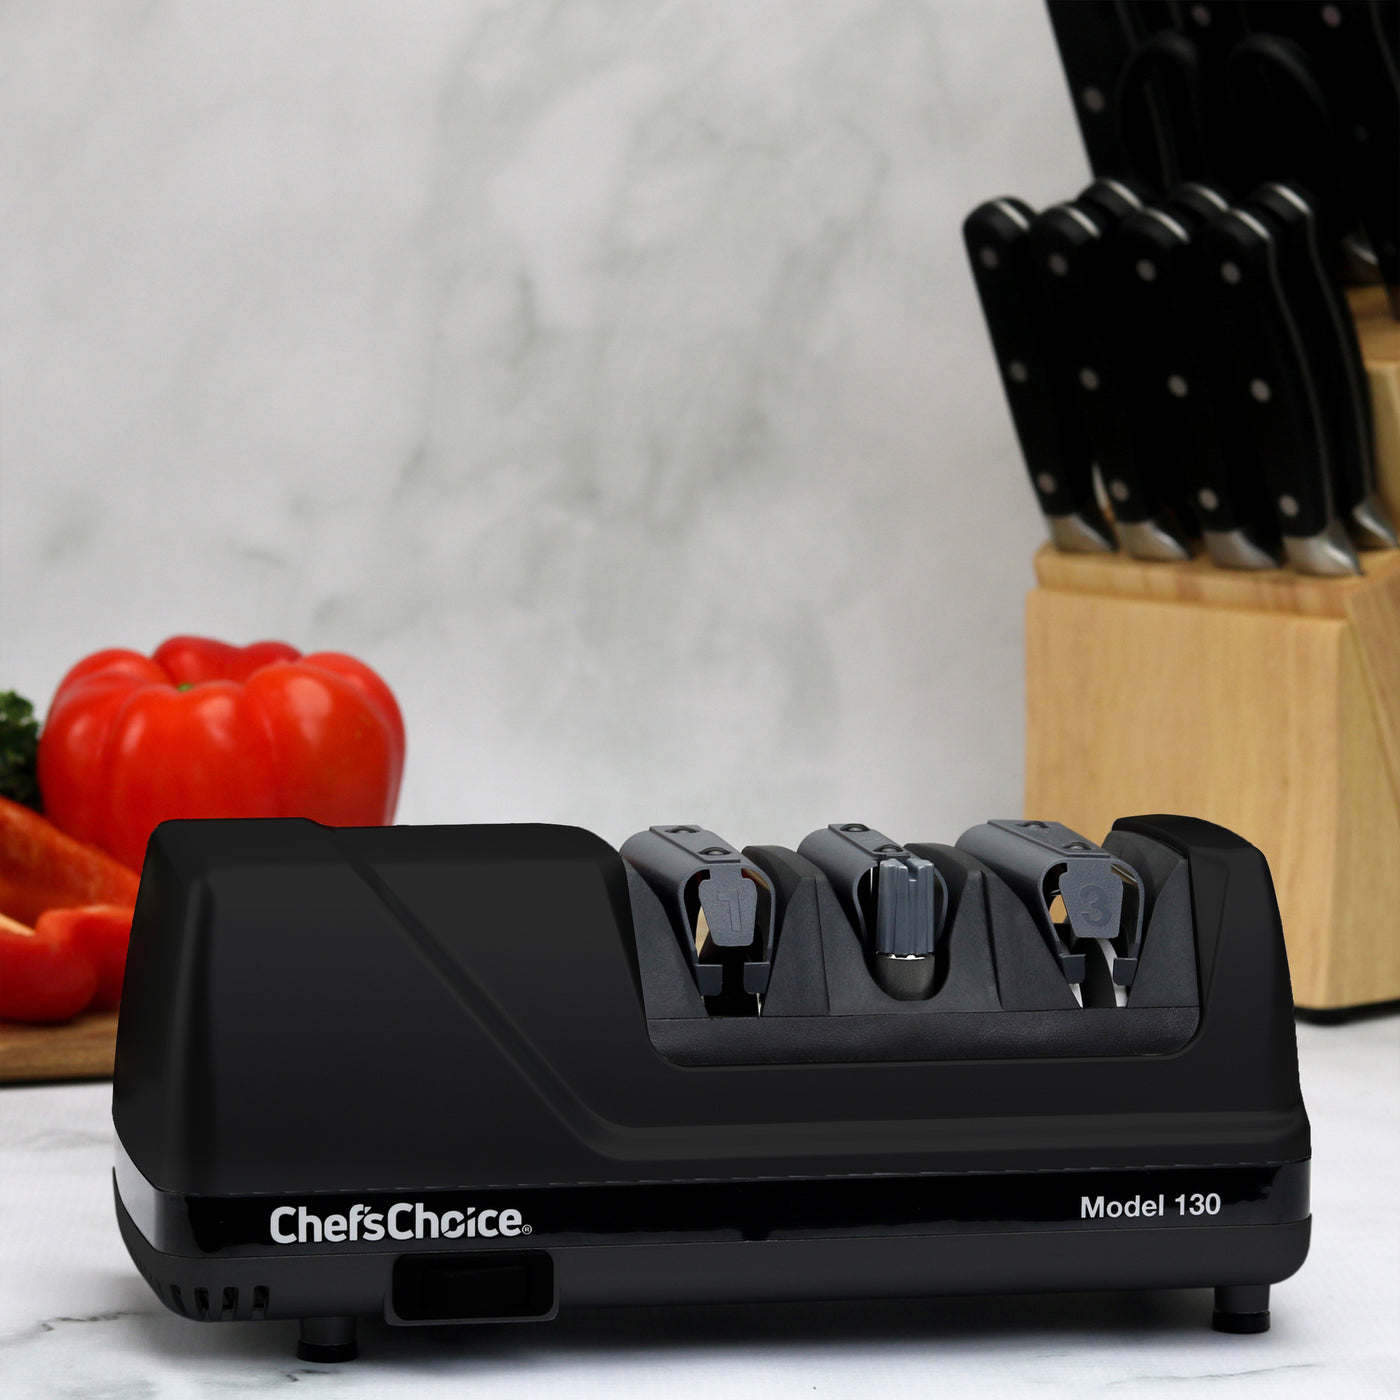  Chef'sChoice 130 Professional Electric Knife